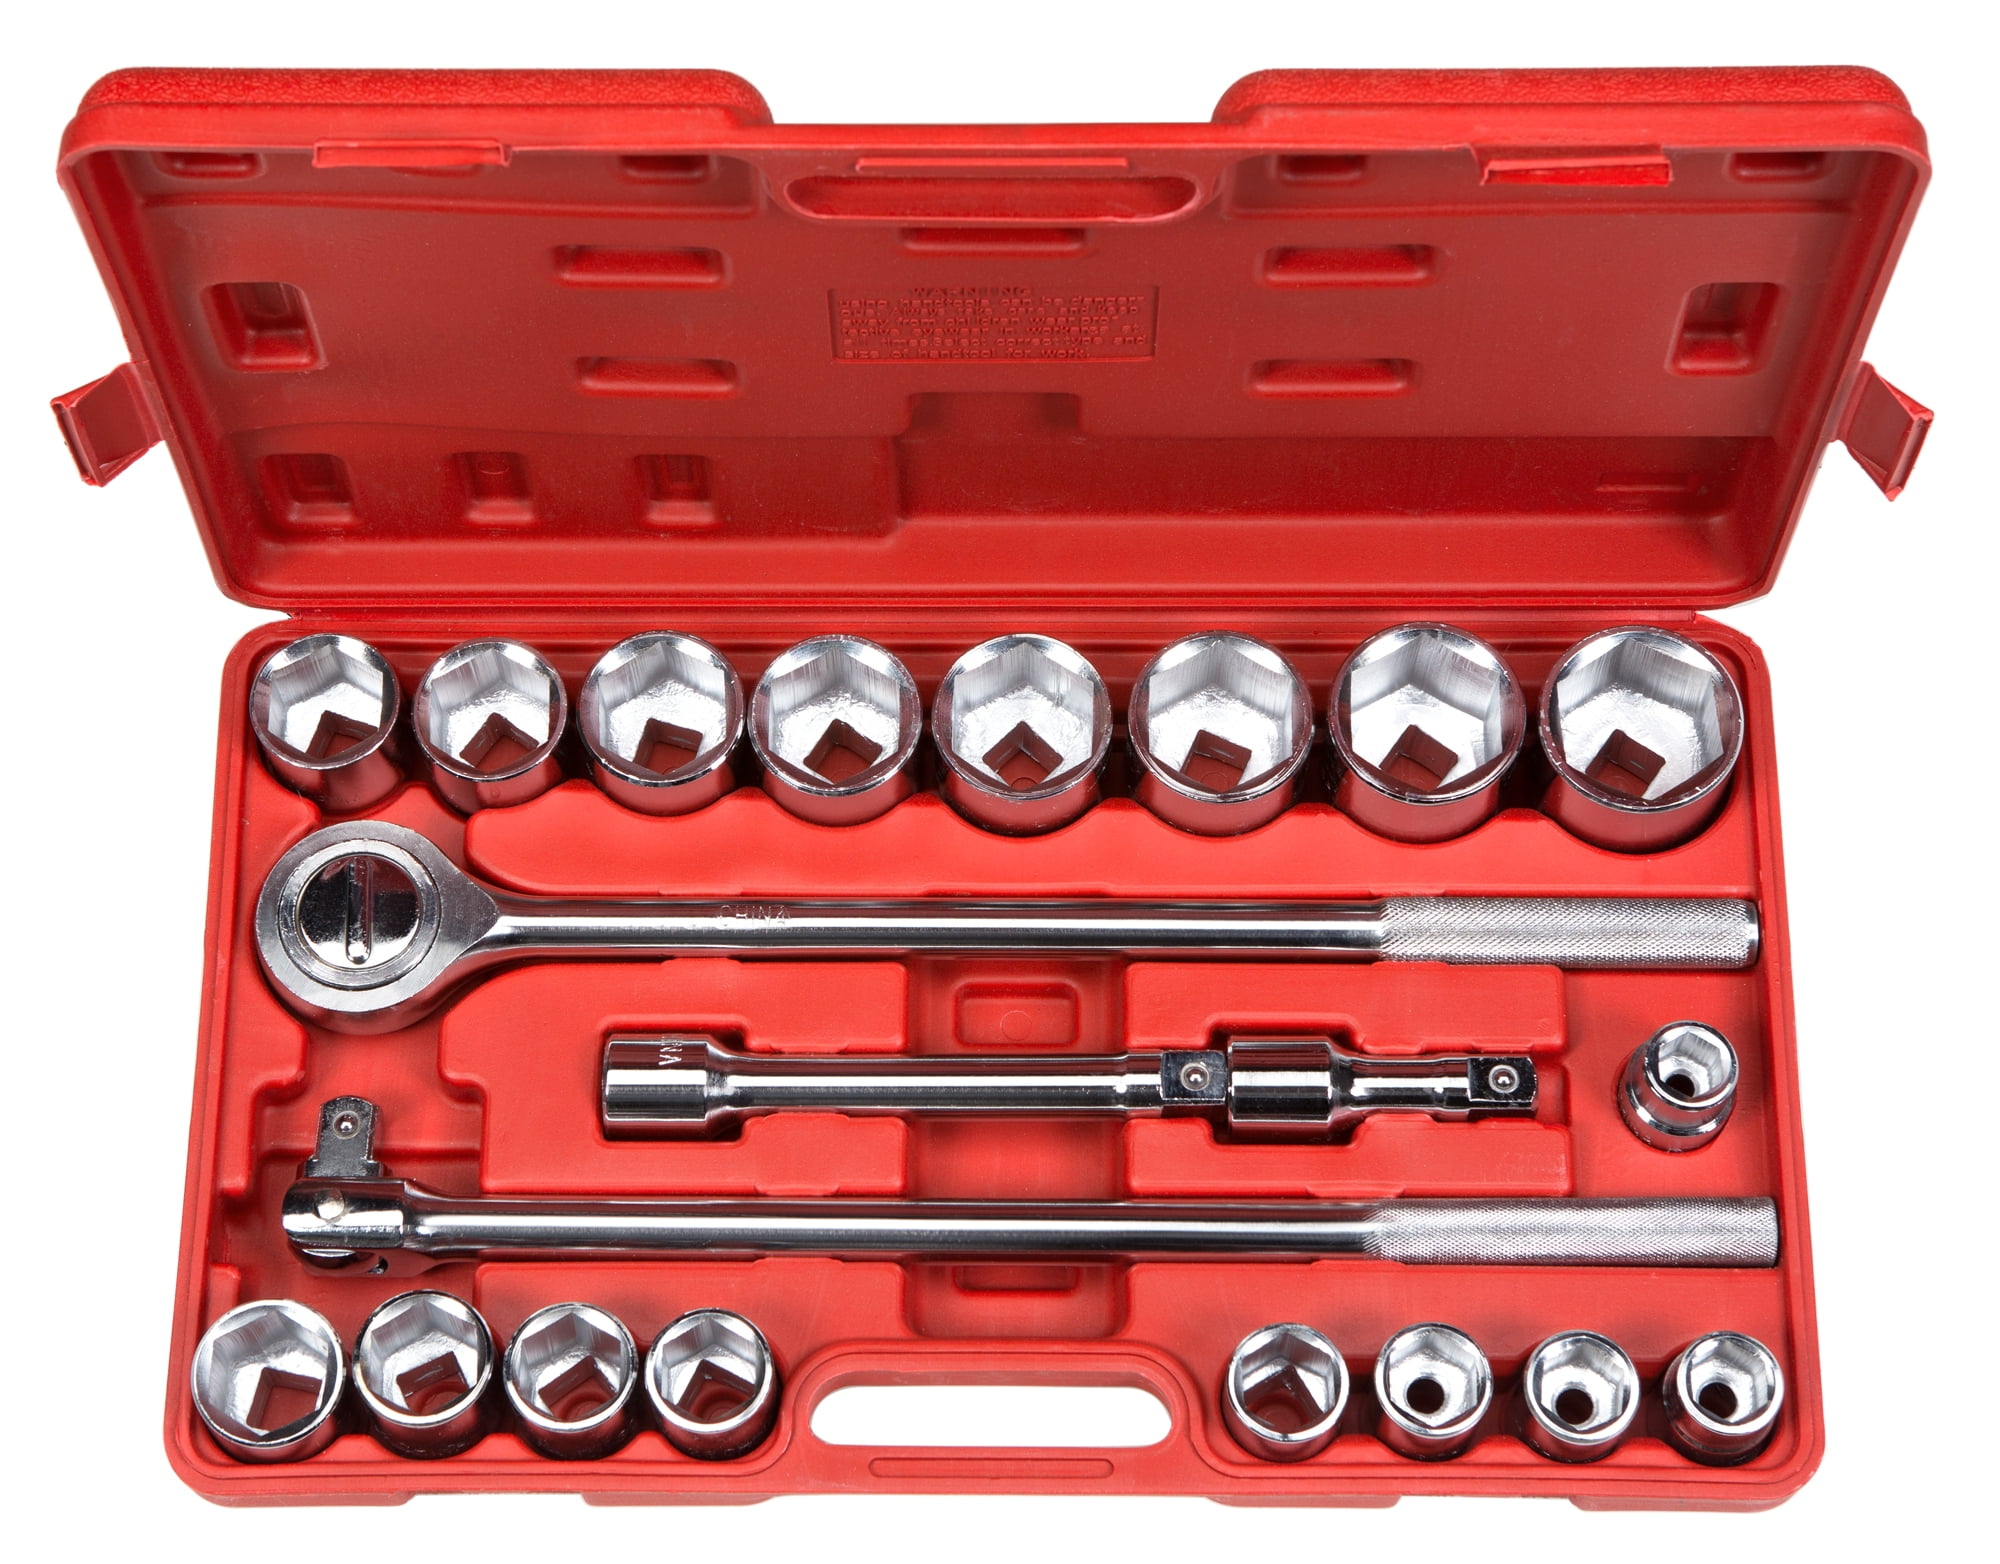 HEAVY DUTY 3//4/" Inch dr Socket Set 19-50mm 6 Point Sockets Ratchets Extensions